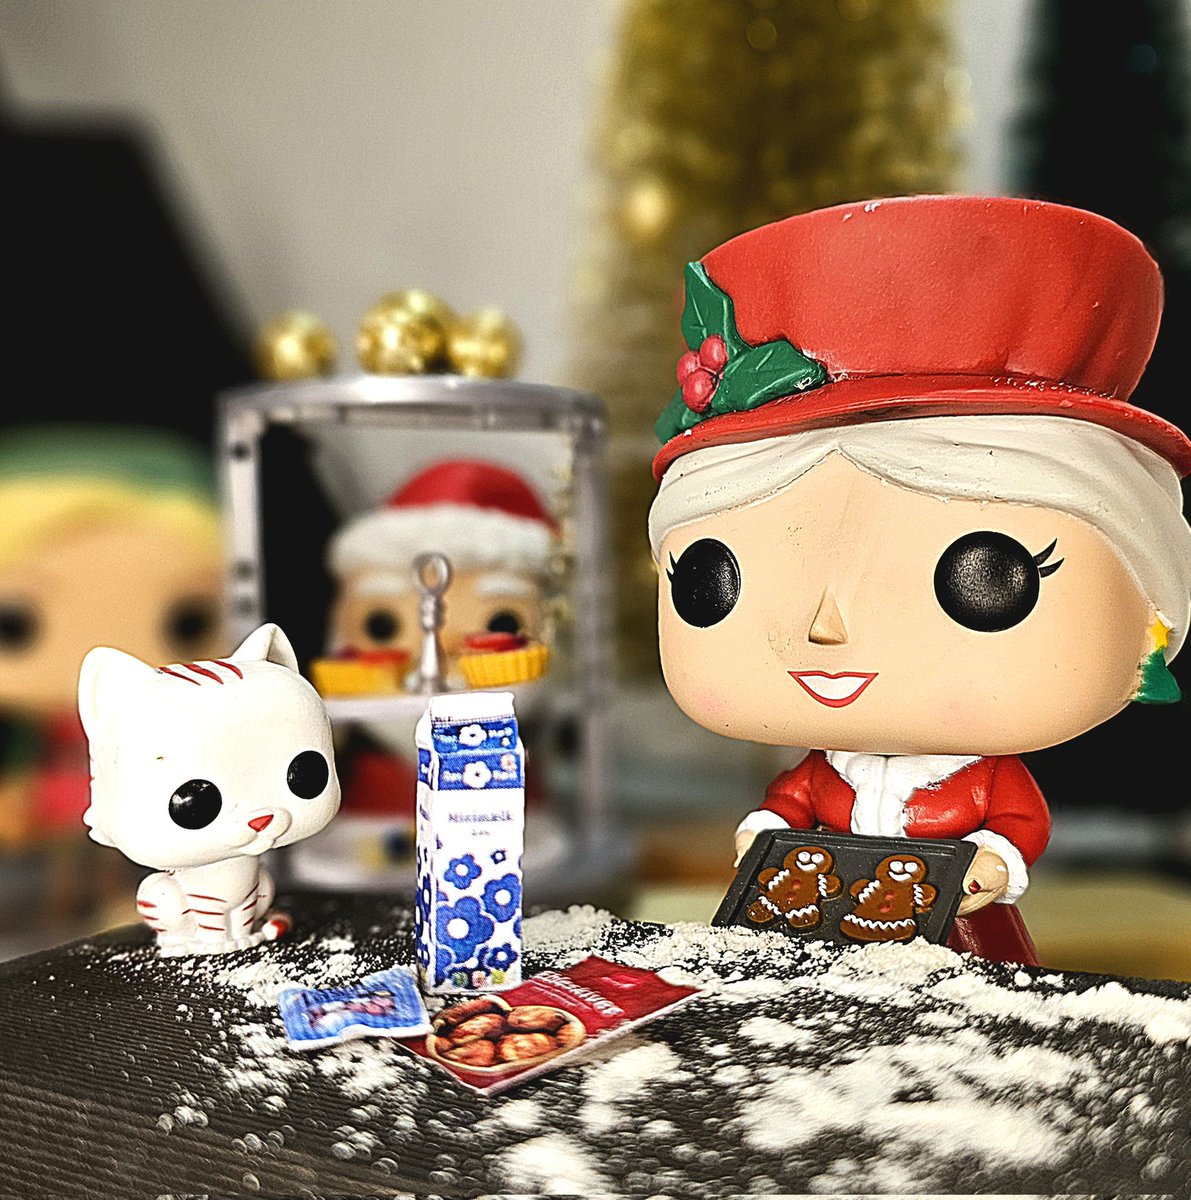 Mrs. Santa Claus Holiday baking. 🤶 Rest of the family is taste testers 🤤

@OriginalFunko #FunkoPhotoADayChallenge 
@FunkoEurope #funkounboxed 

#funkofamily #winterfunkoland #FunkoEurope #christmasbaking #funkofunatic